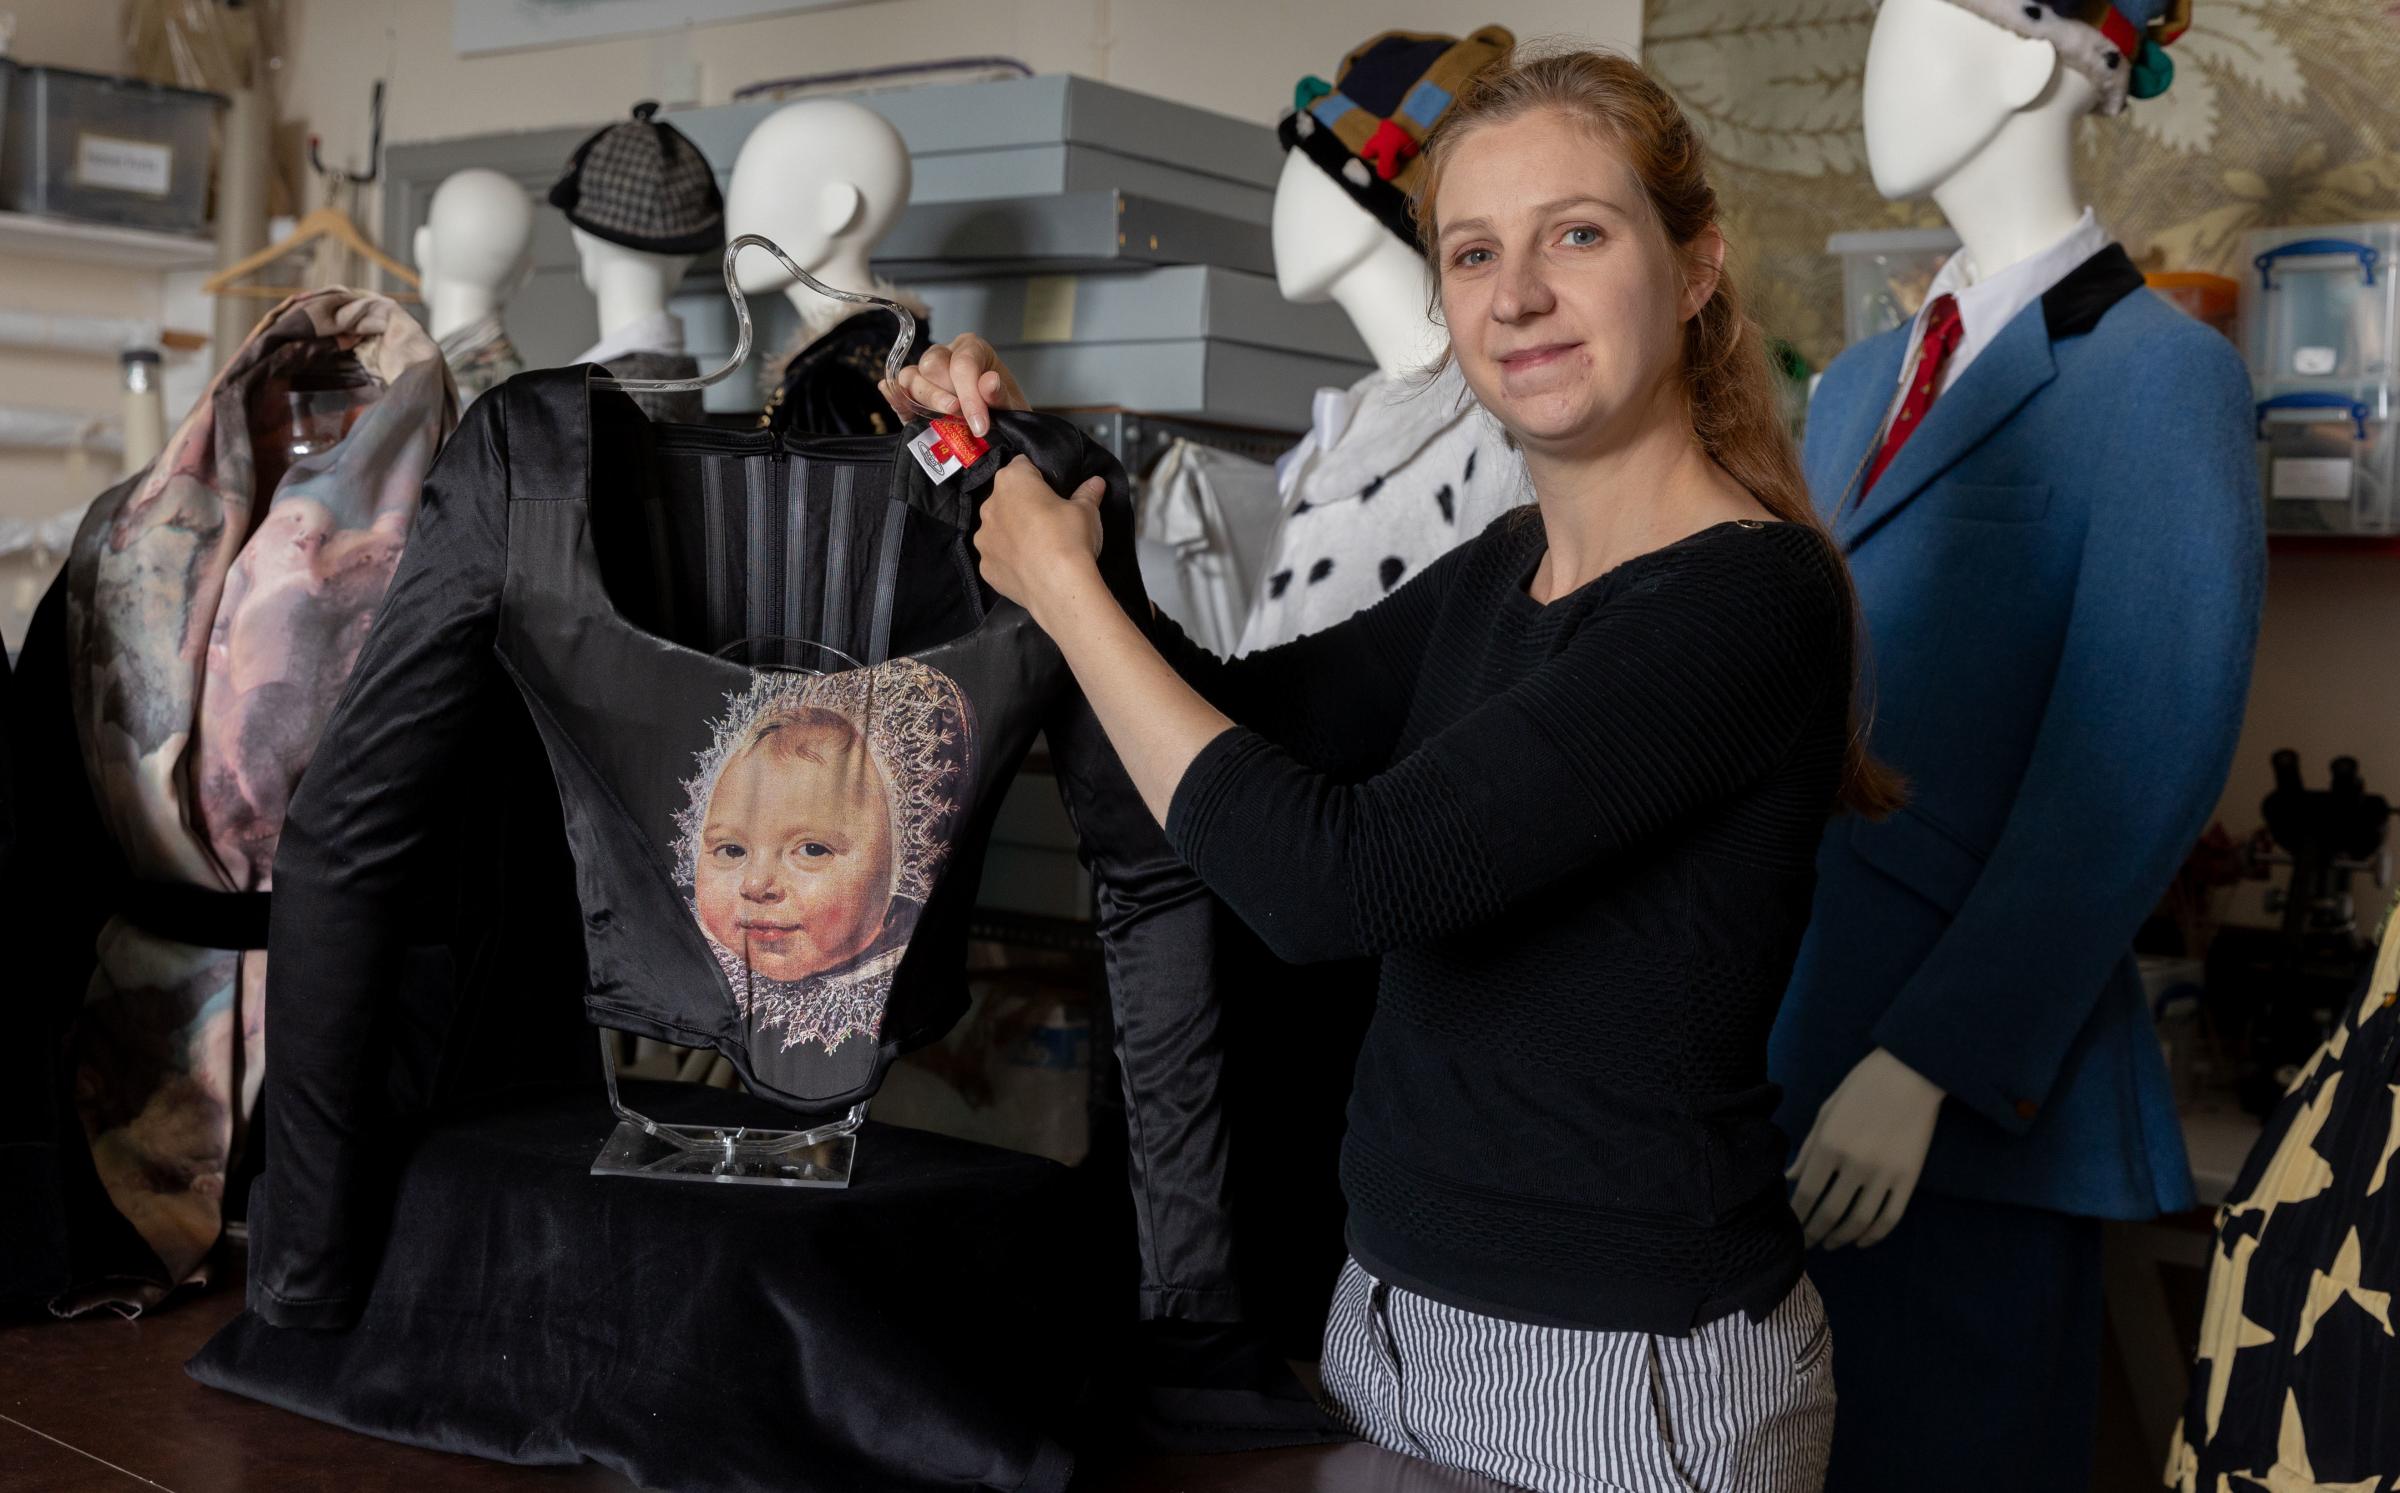 Rachel Whitworth Curator of Fashion & Textiles at Bowes Museum and Cecilia Oliver Textile Conservator starting to put together the Vivienne Westwood A Collectors Story exhibition in the Fashion & Textile Gallery in Bowes Museum Picture: SARAH